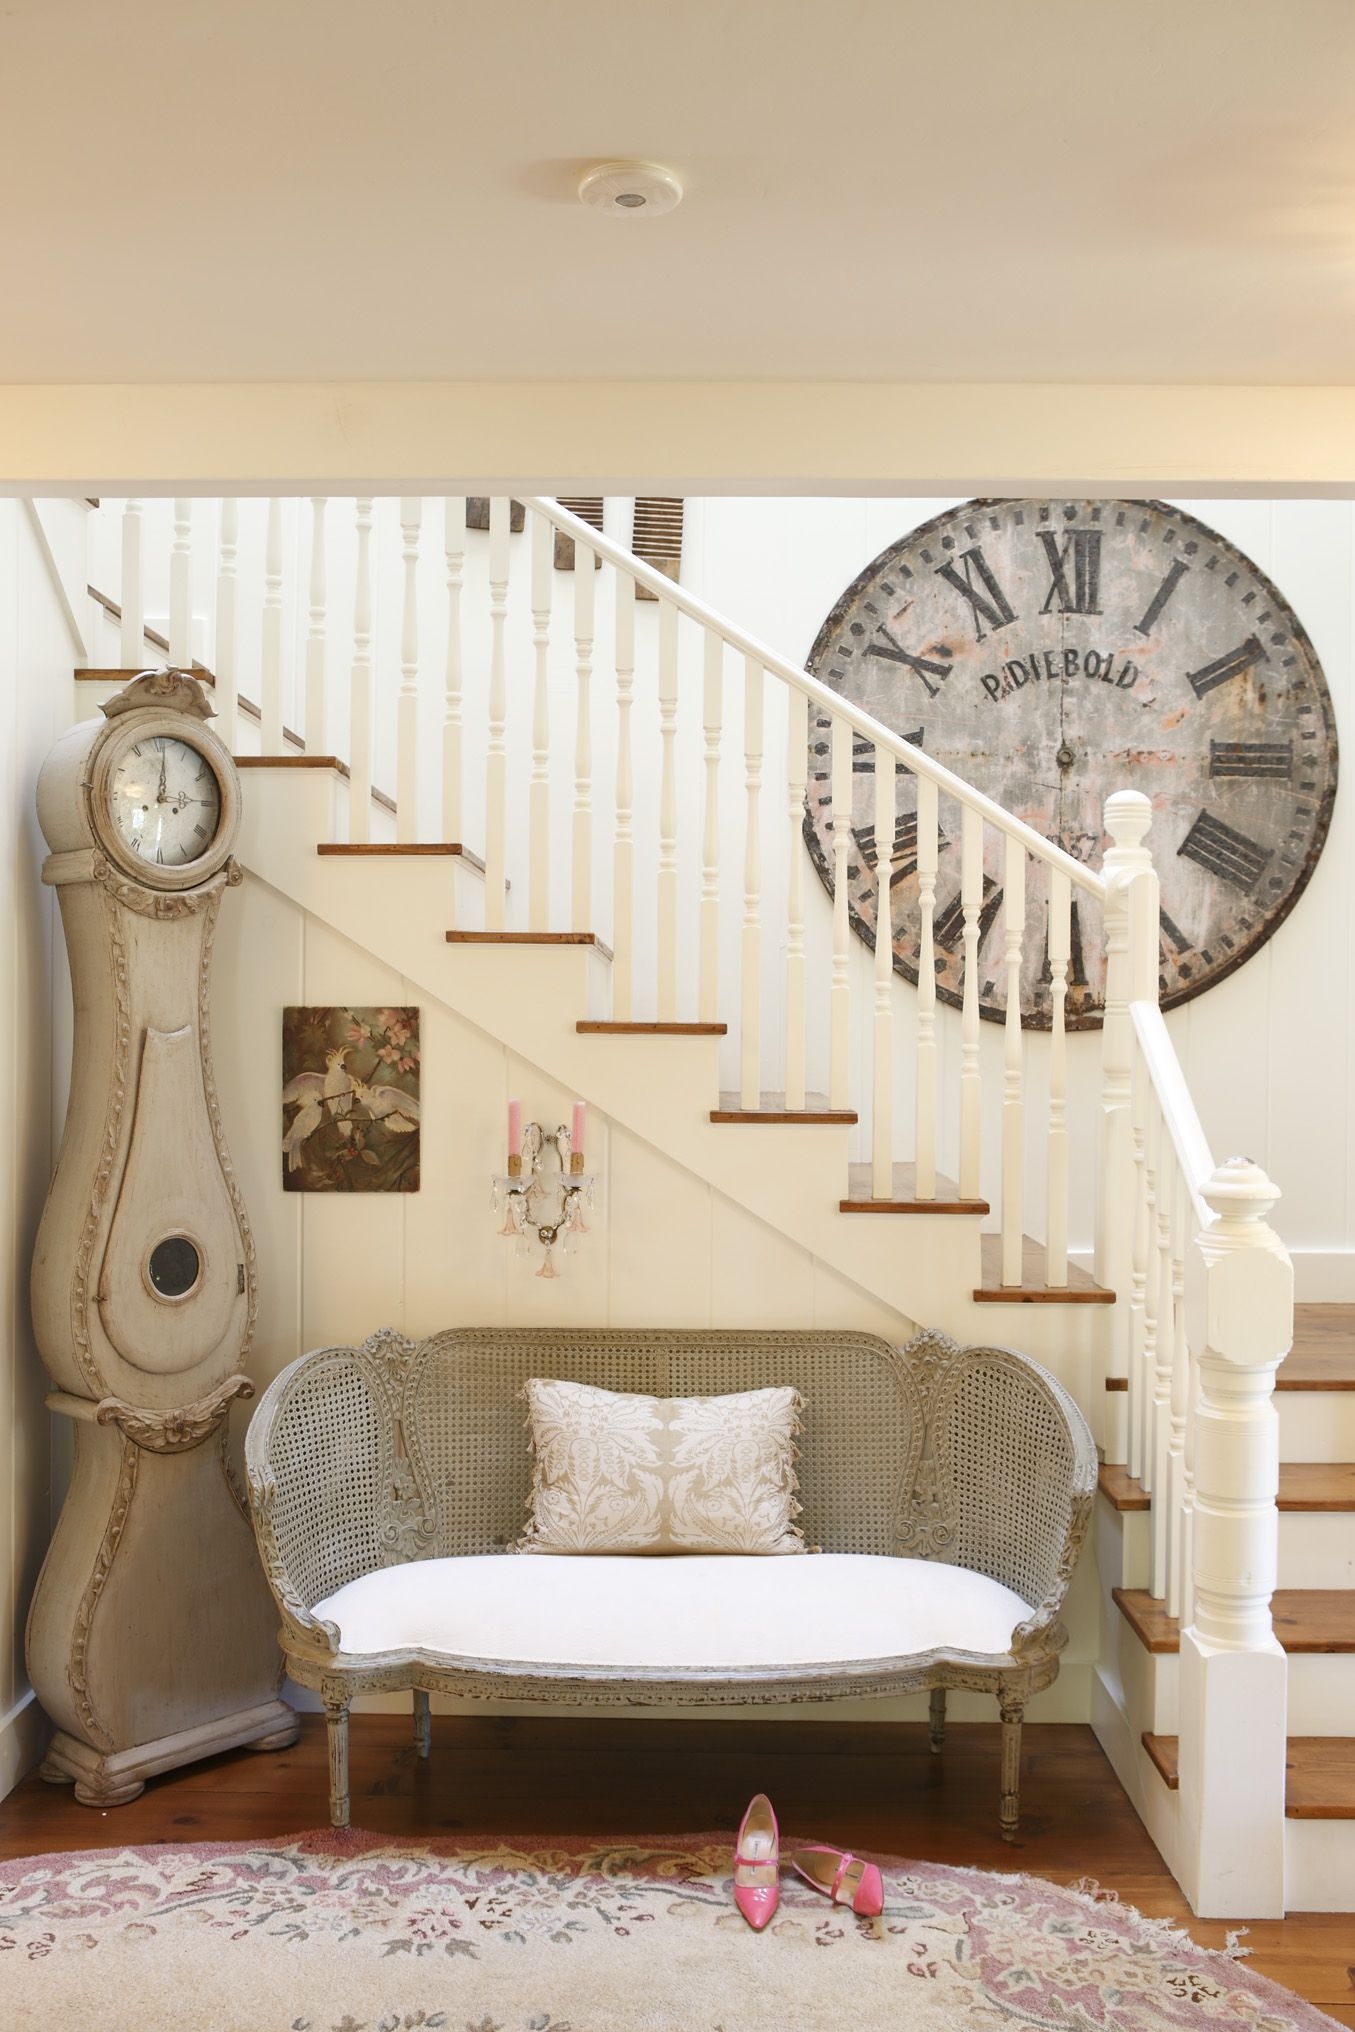 Large french style wall clocks